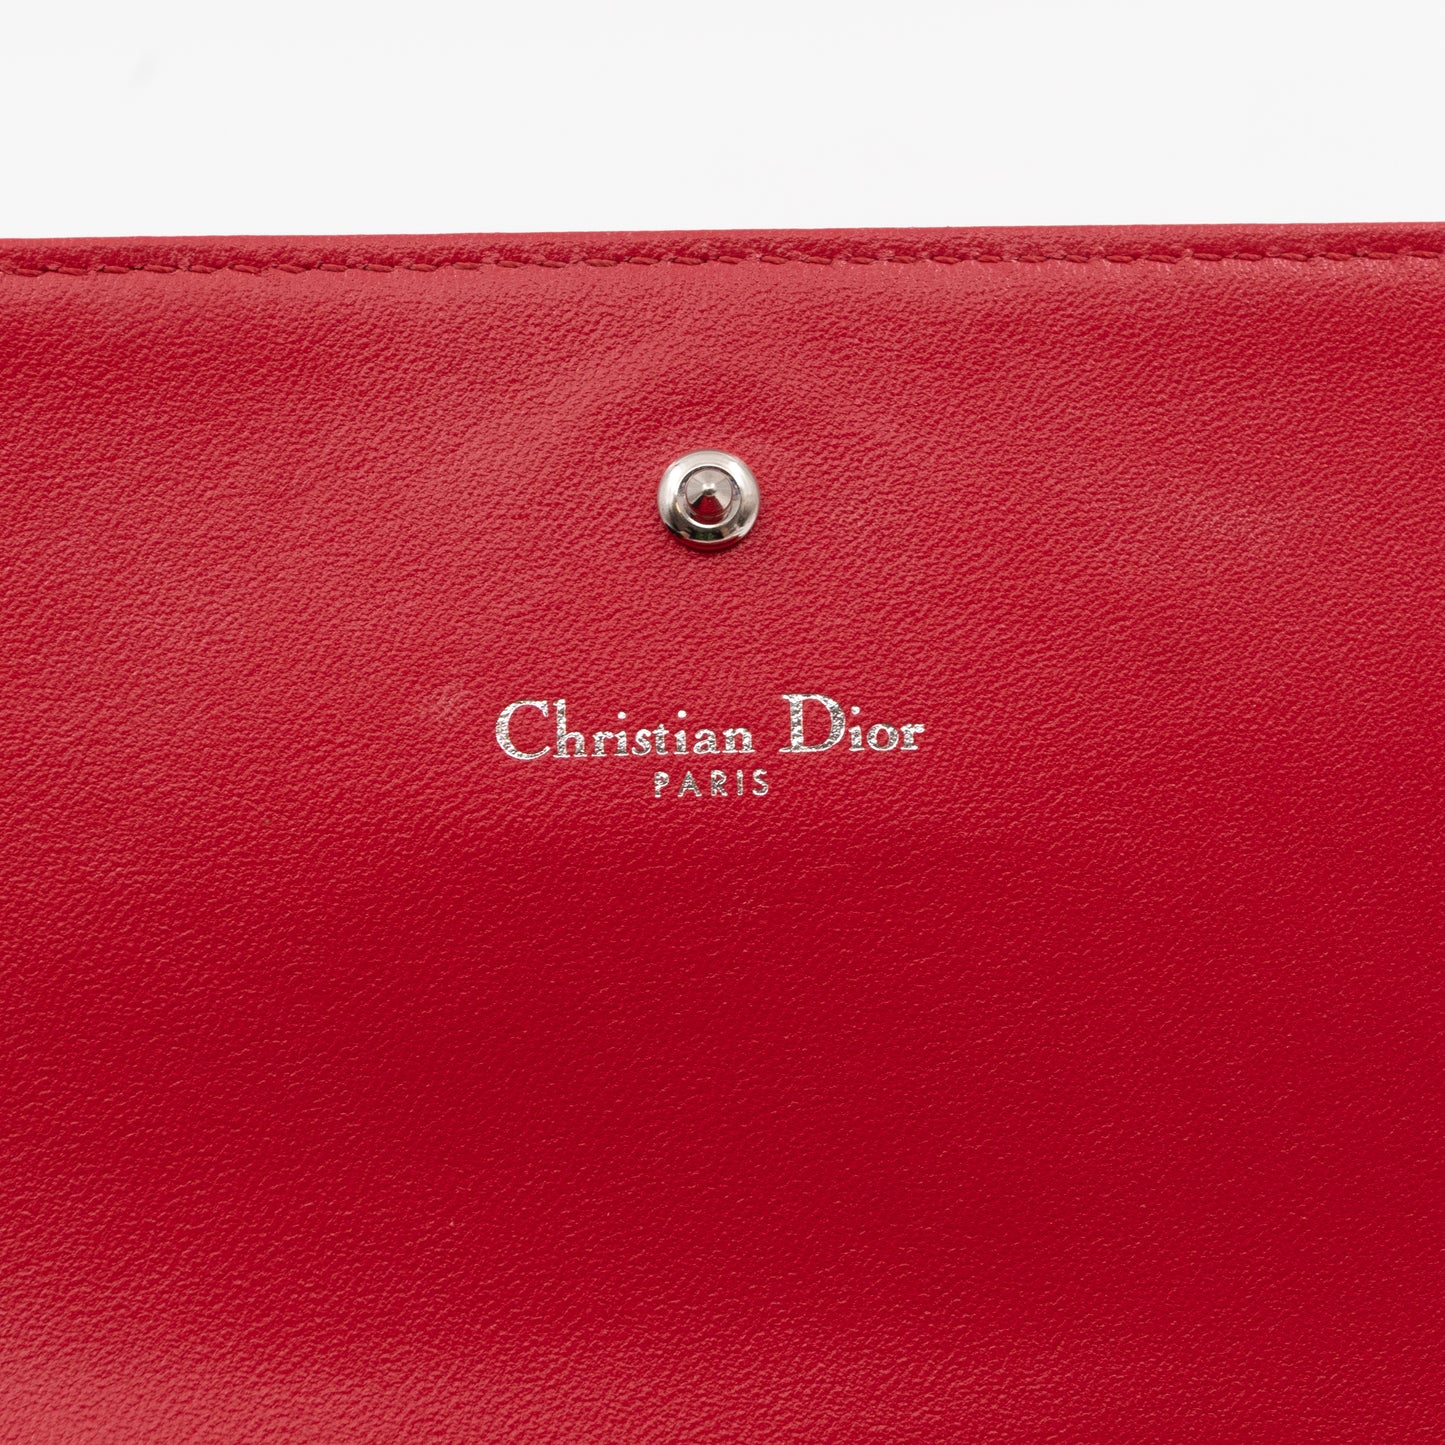 Diorama Croisiere Wallet On Chain Red Leather